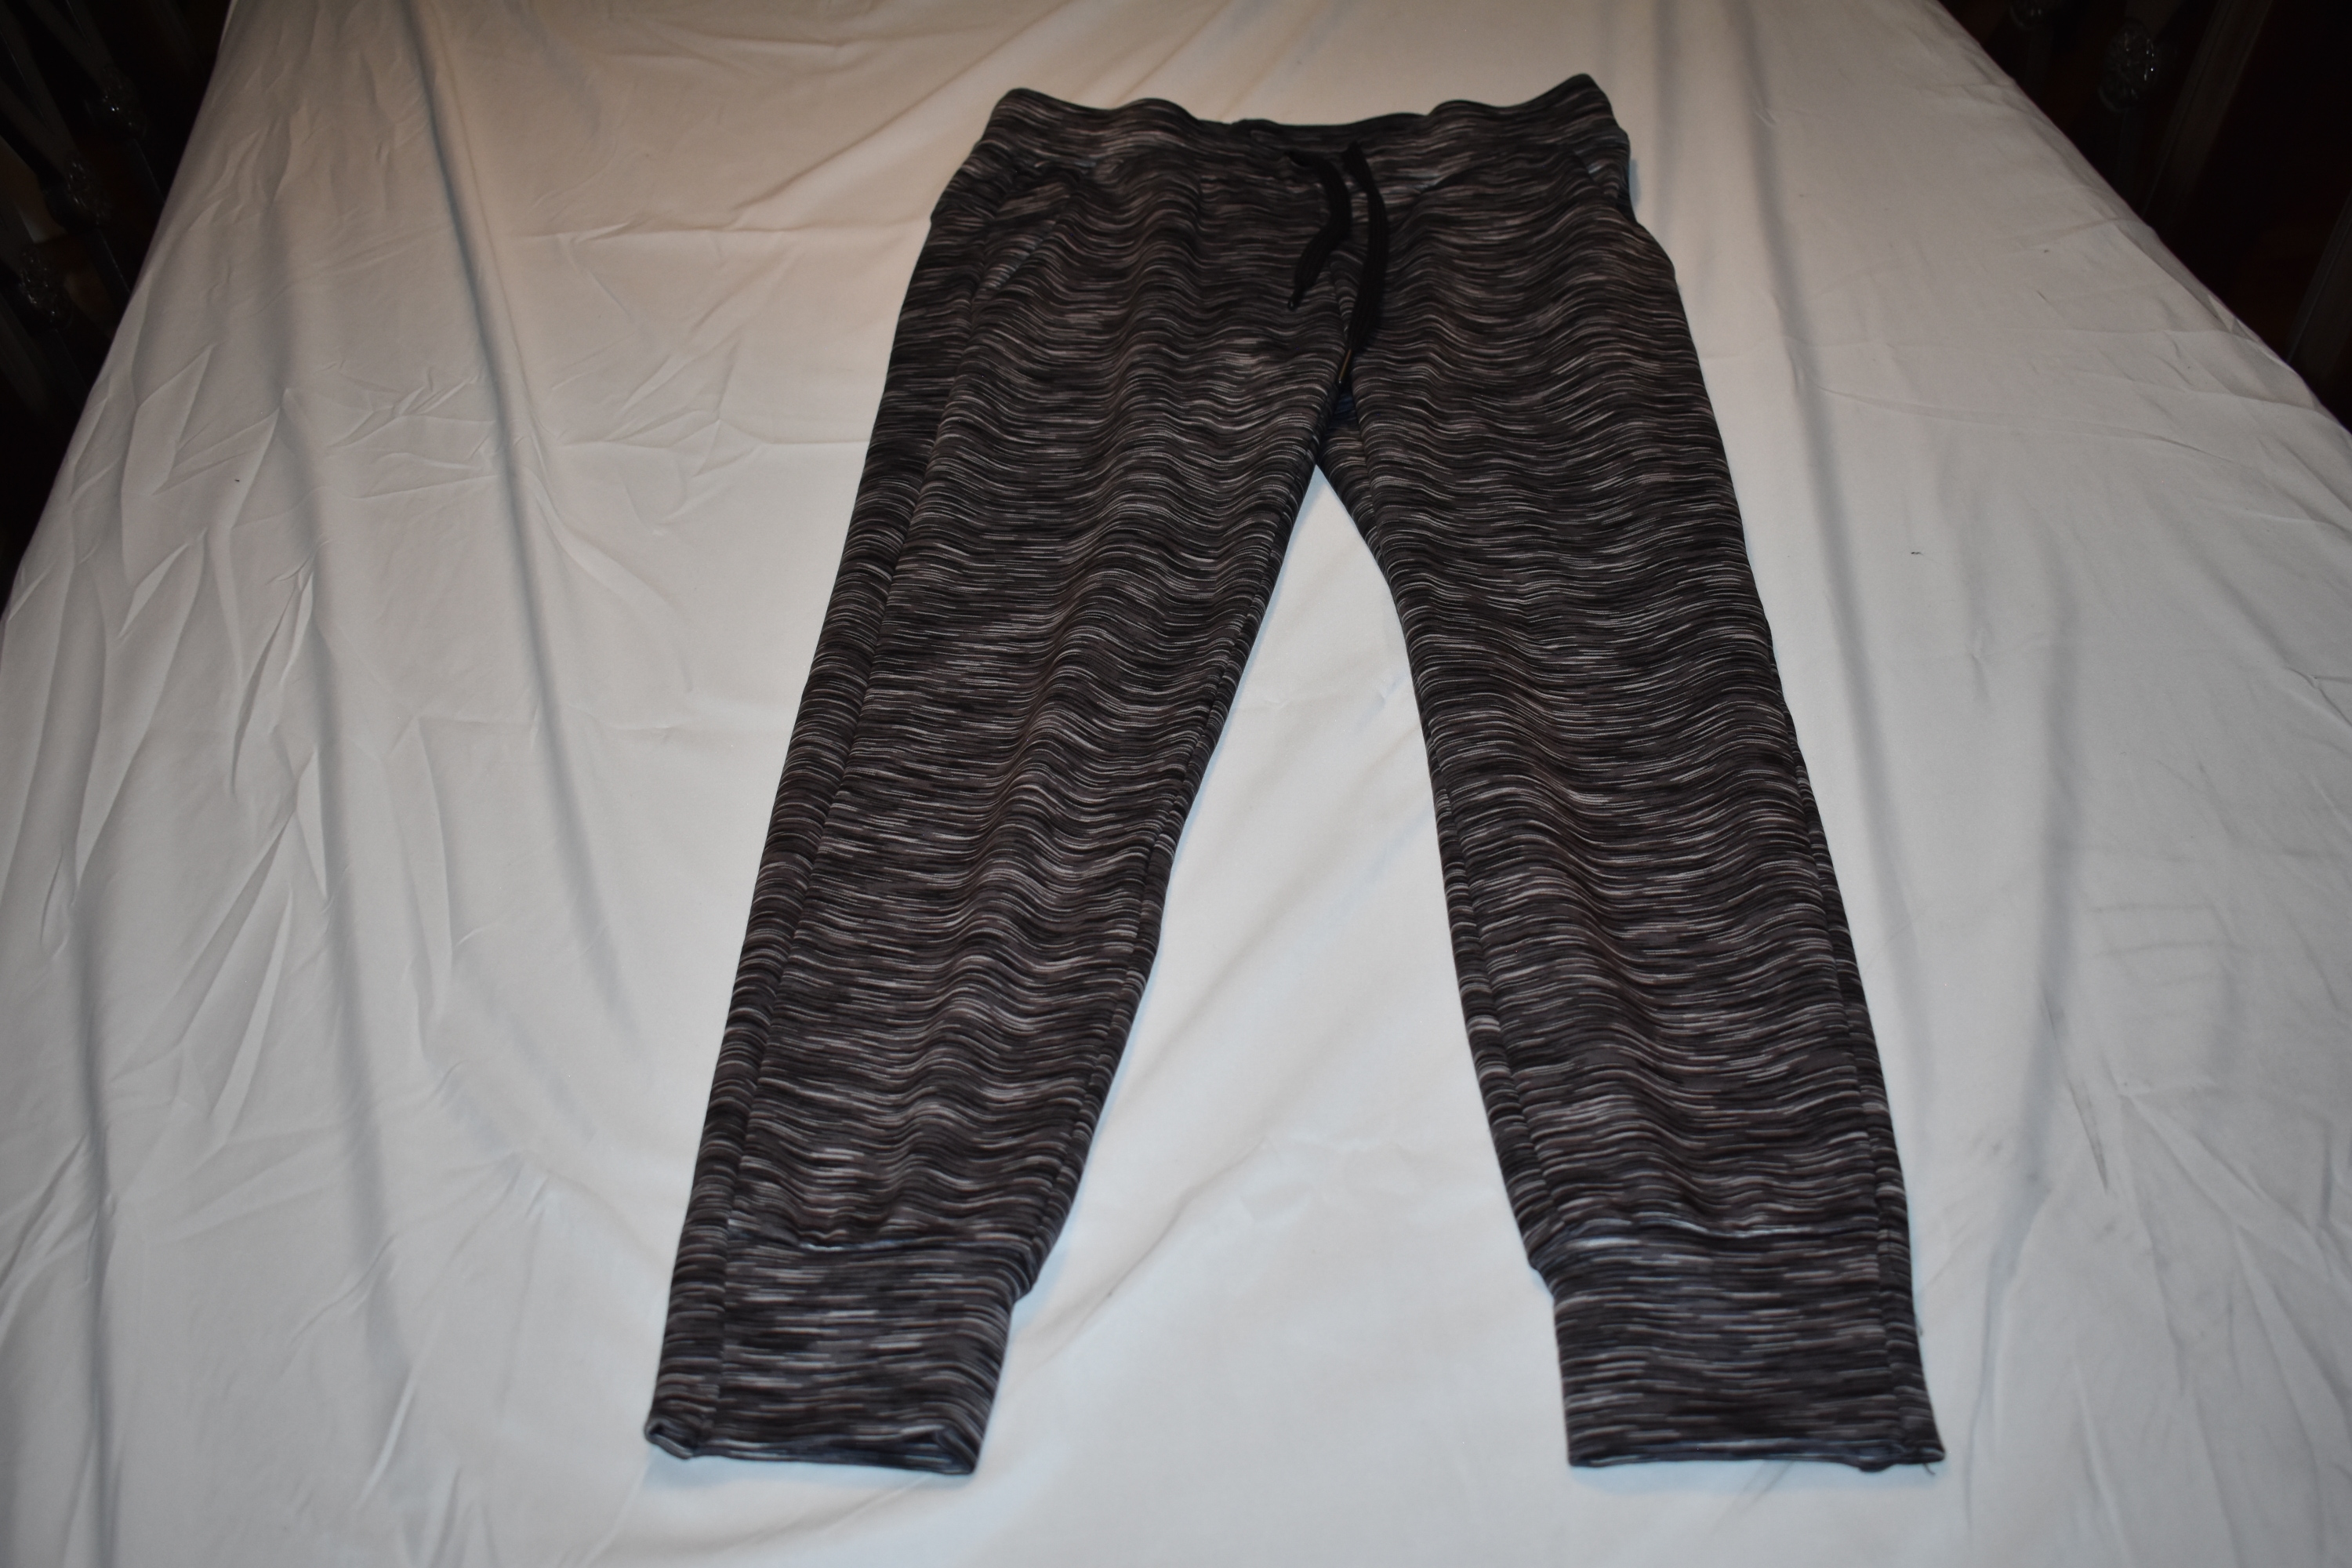 Spyder Active Stretch Pants/Tights, Black/Gray, Women's Small - Great Condition!